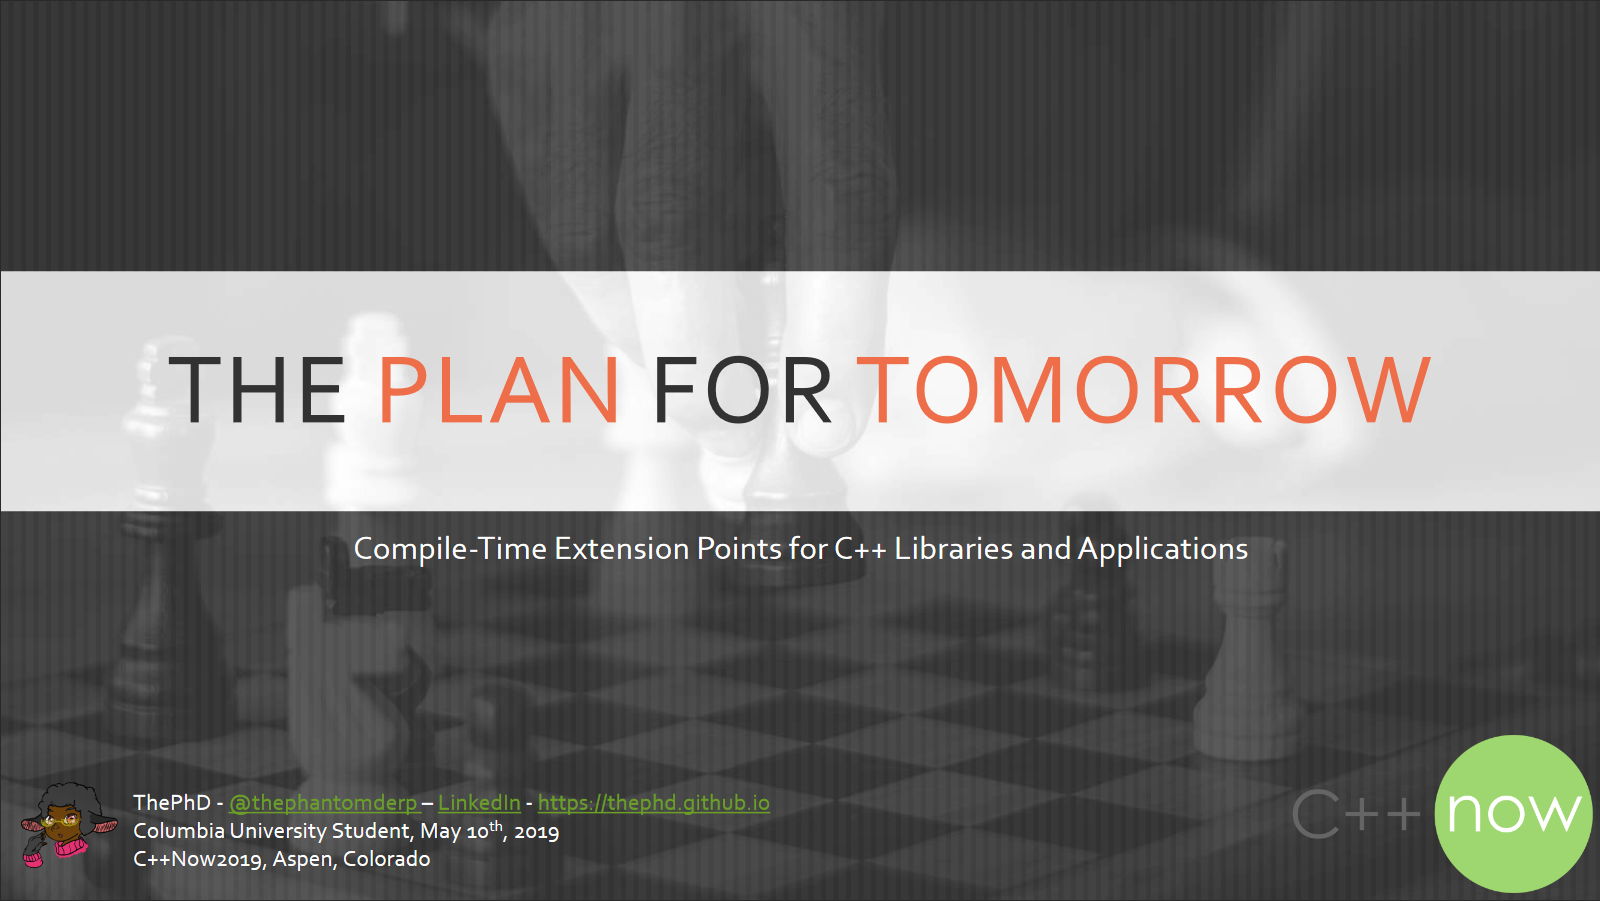 The Plan for Tomorrow - a C++Now 2019 talk on Extension Points